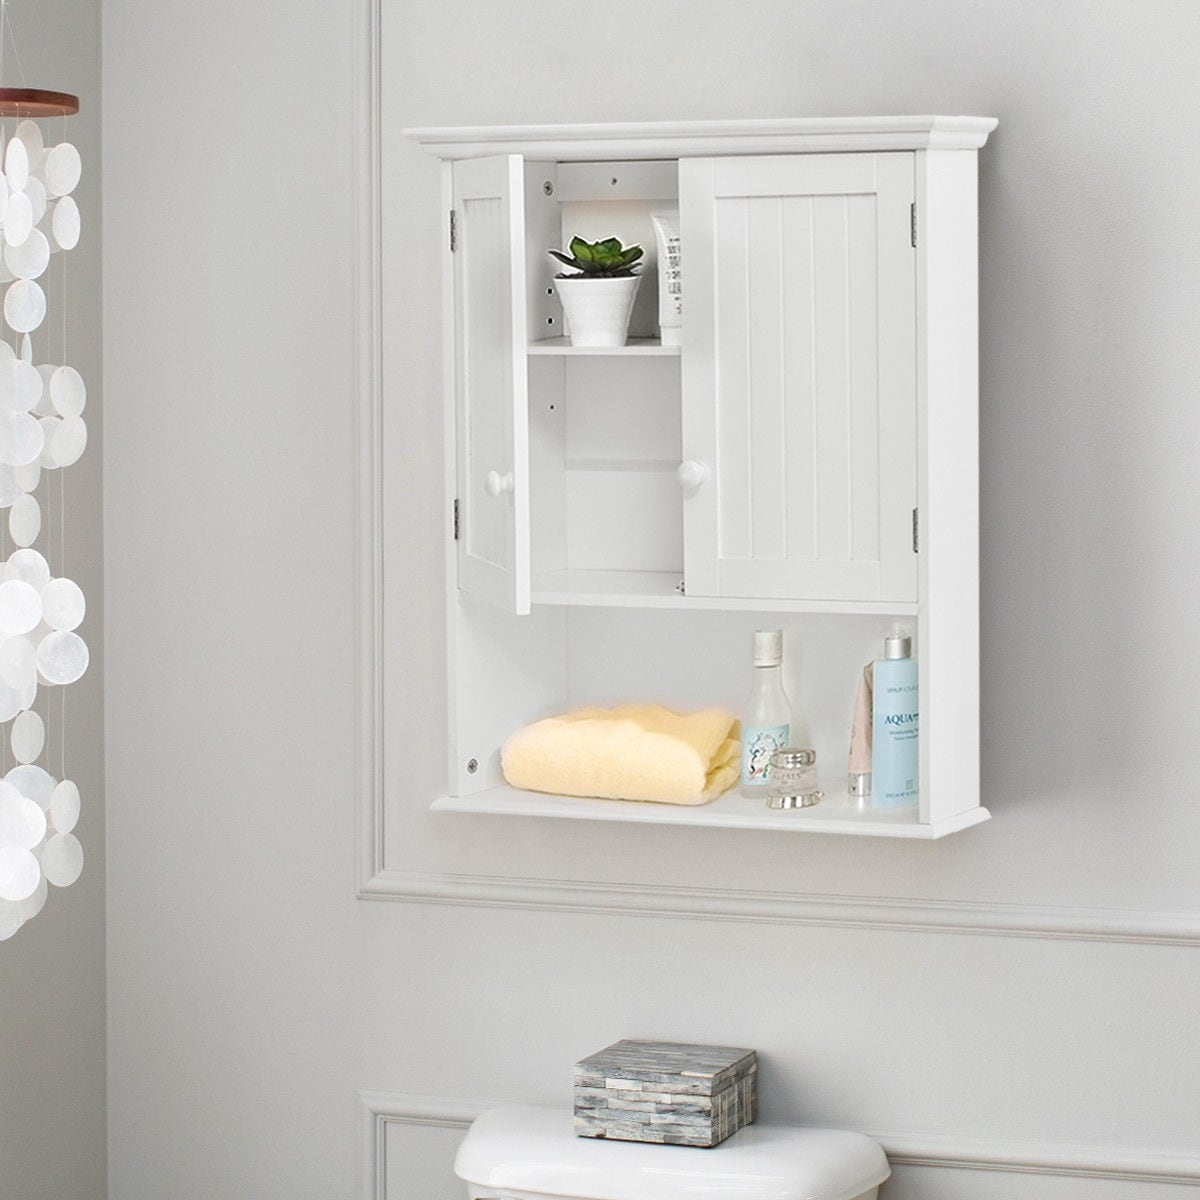 WELLFOR CY bathroom cabinet 23.5-in x 28-in x 8-in White Bathroom Wall ...